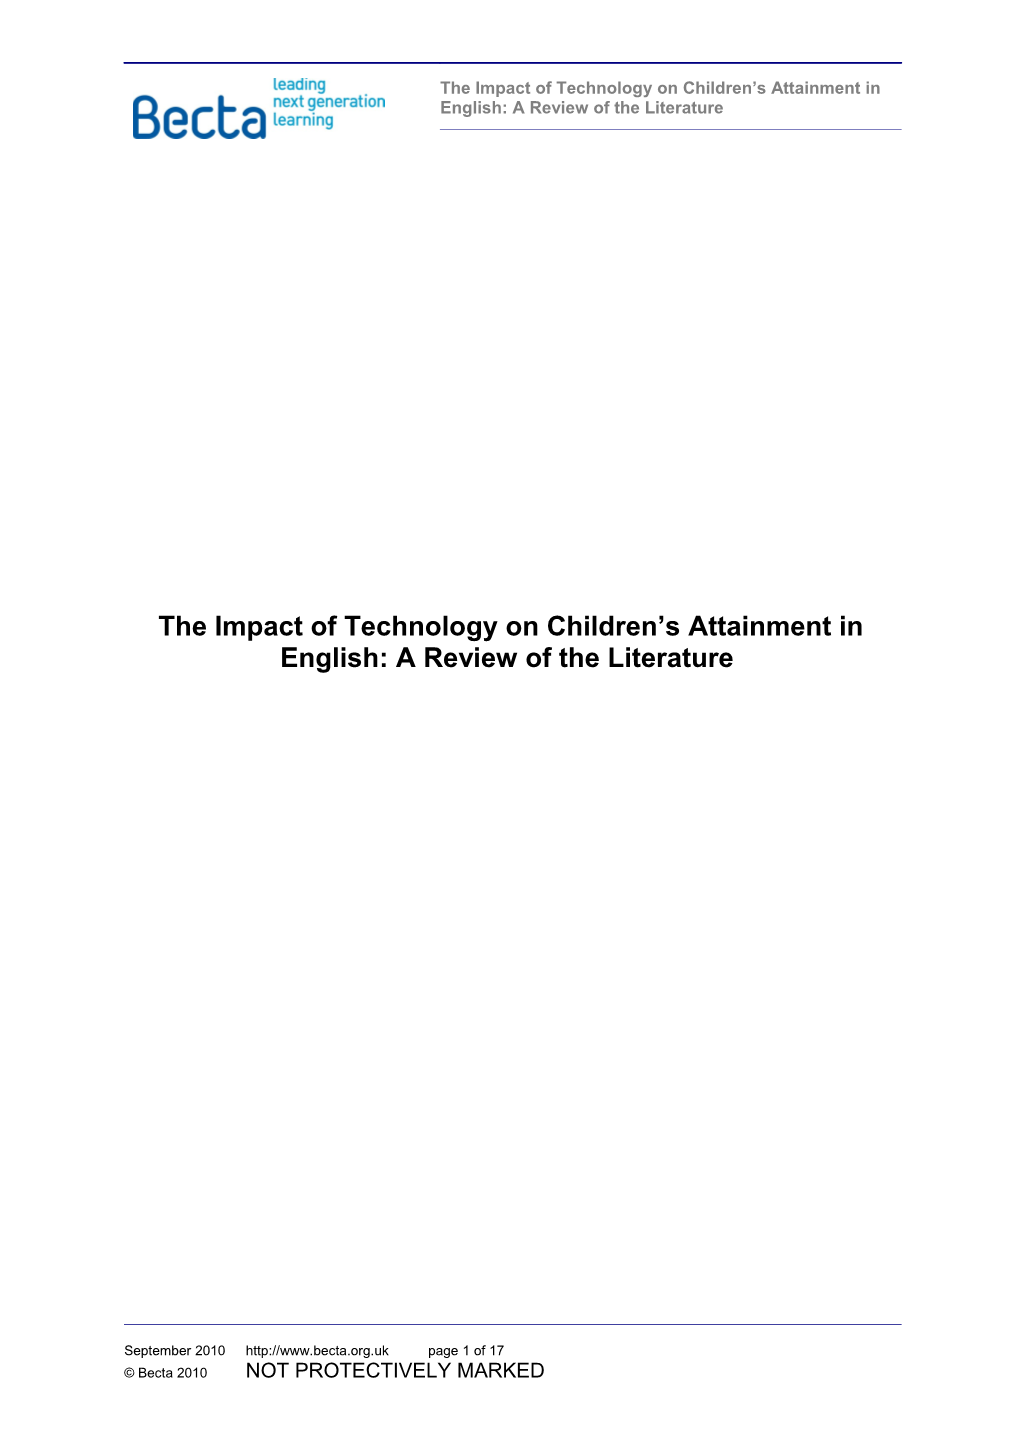 The Impact of Technology on Children S Attainment in English: a Review of the Literature